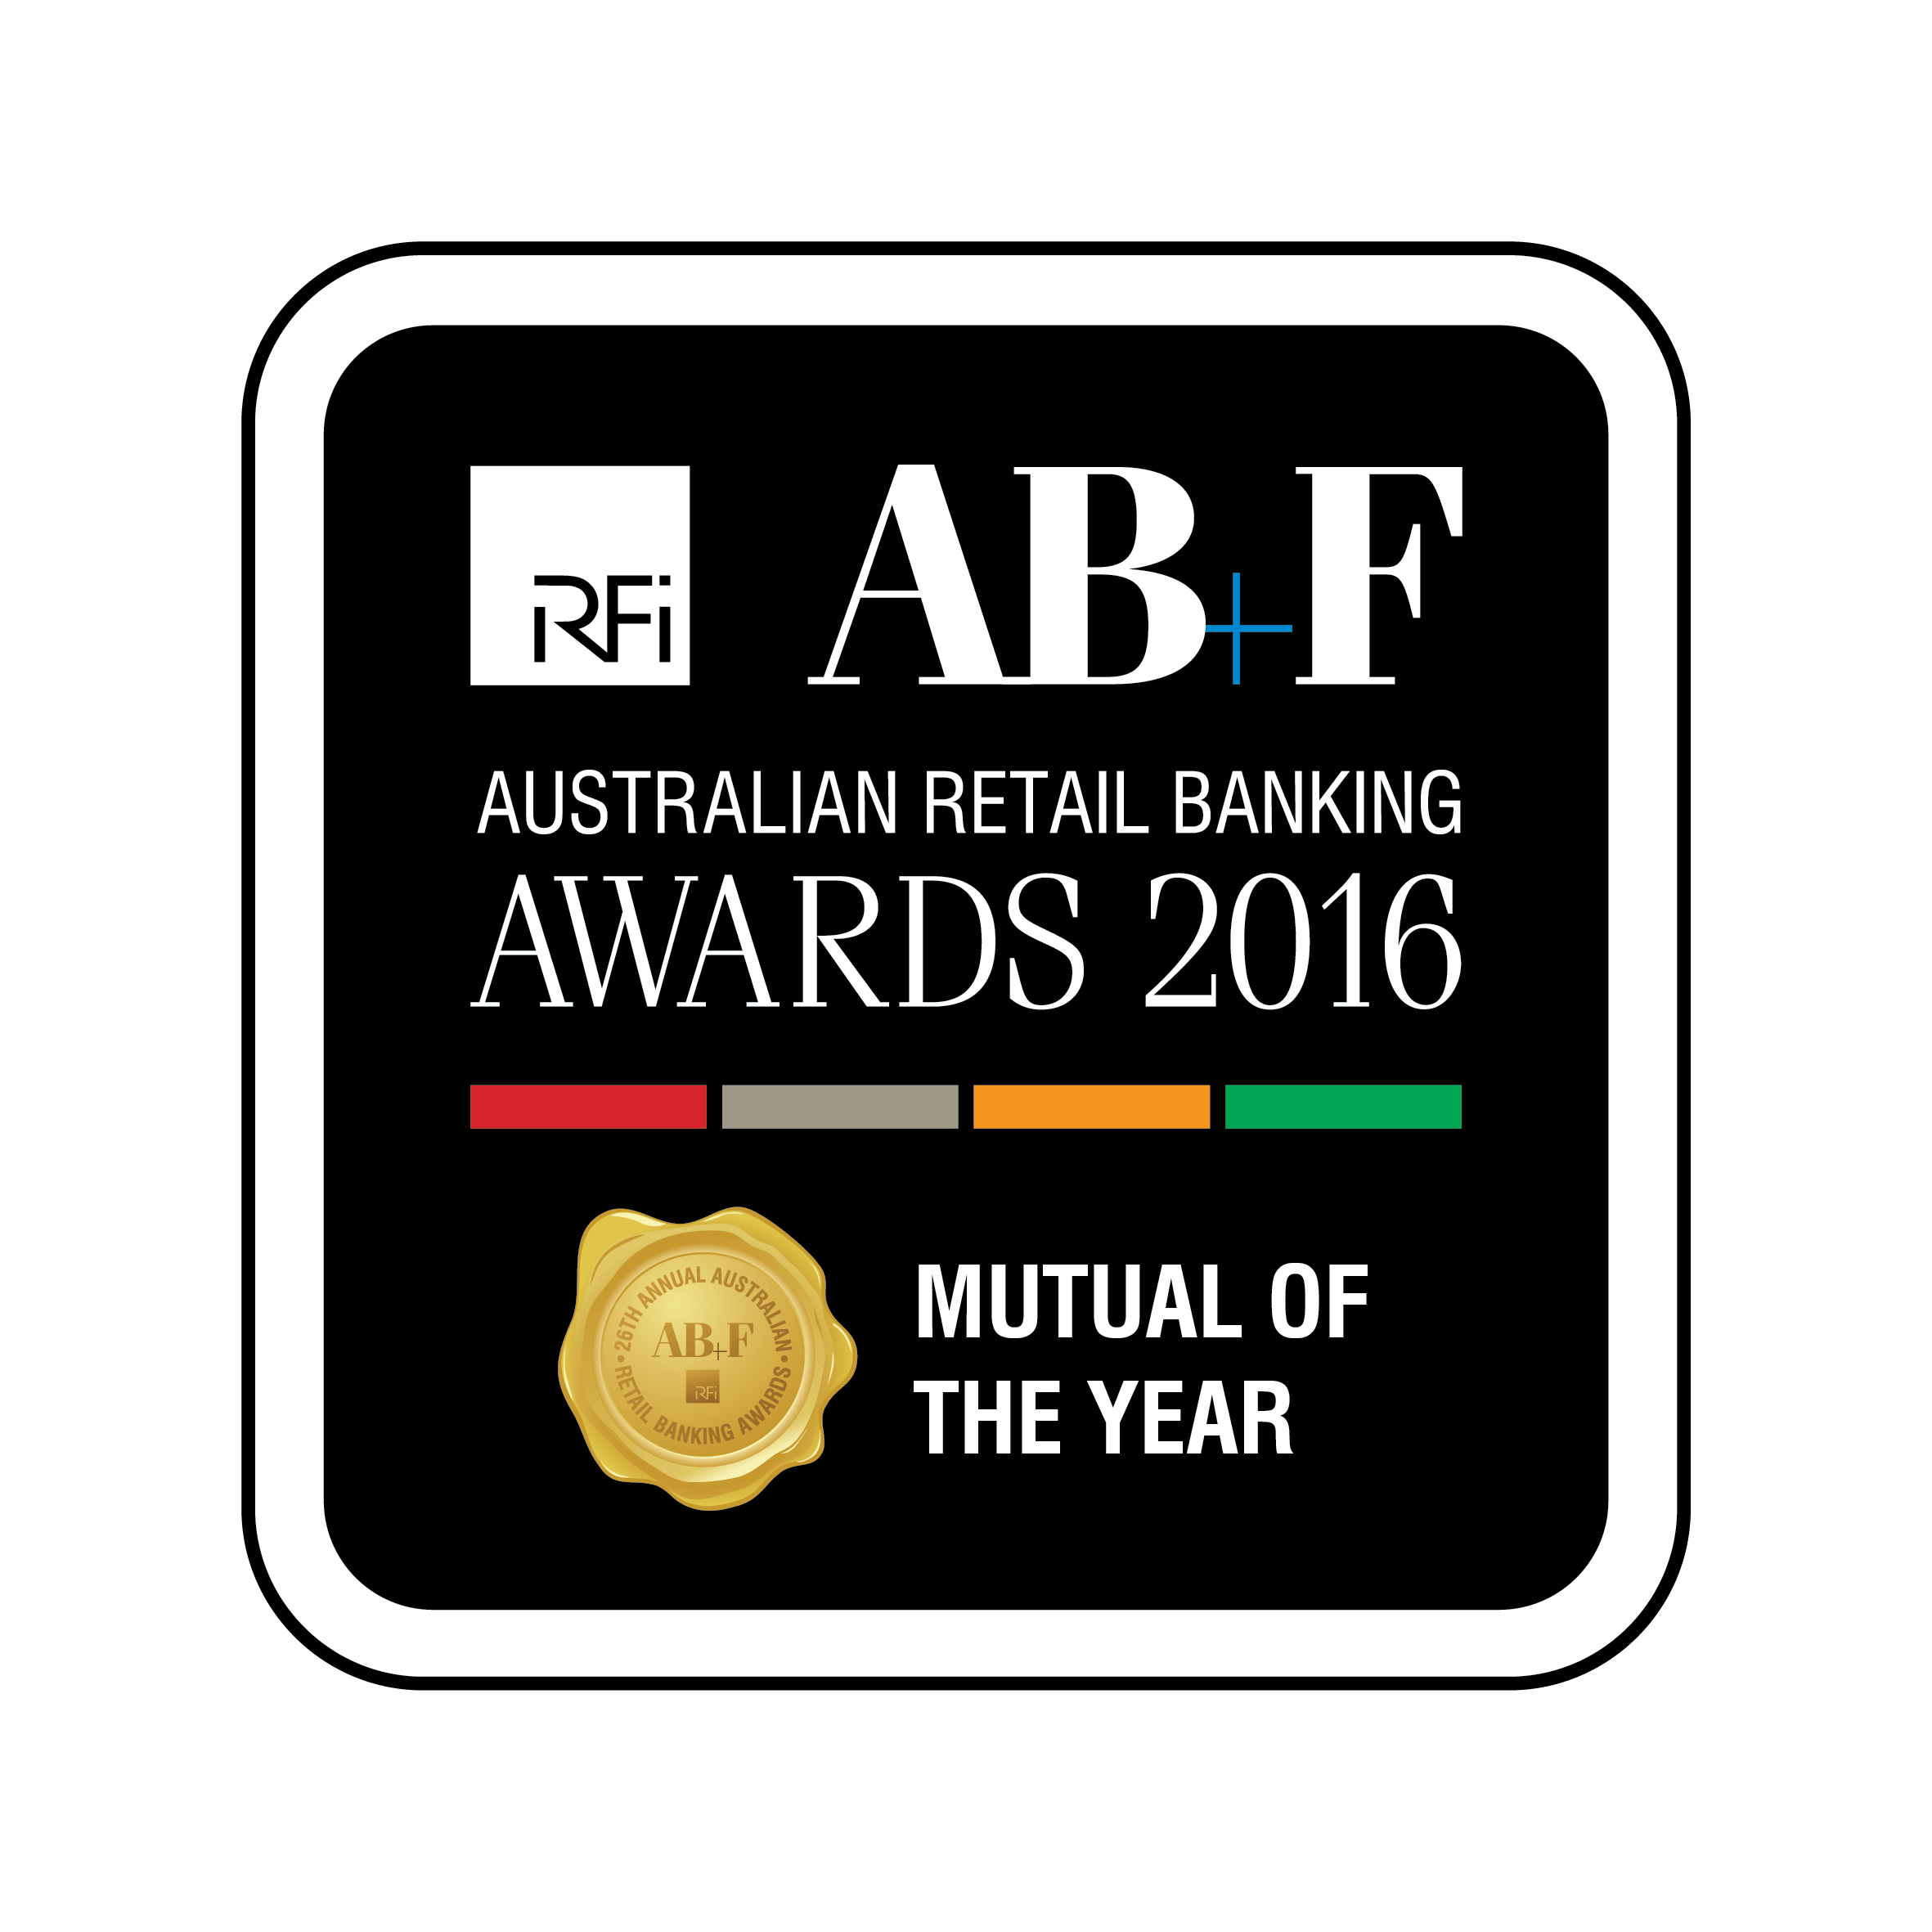 AB+F mutual of the year